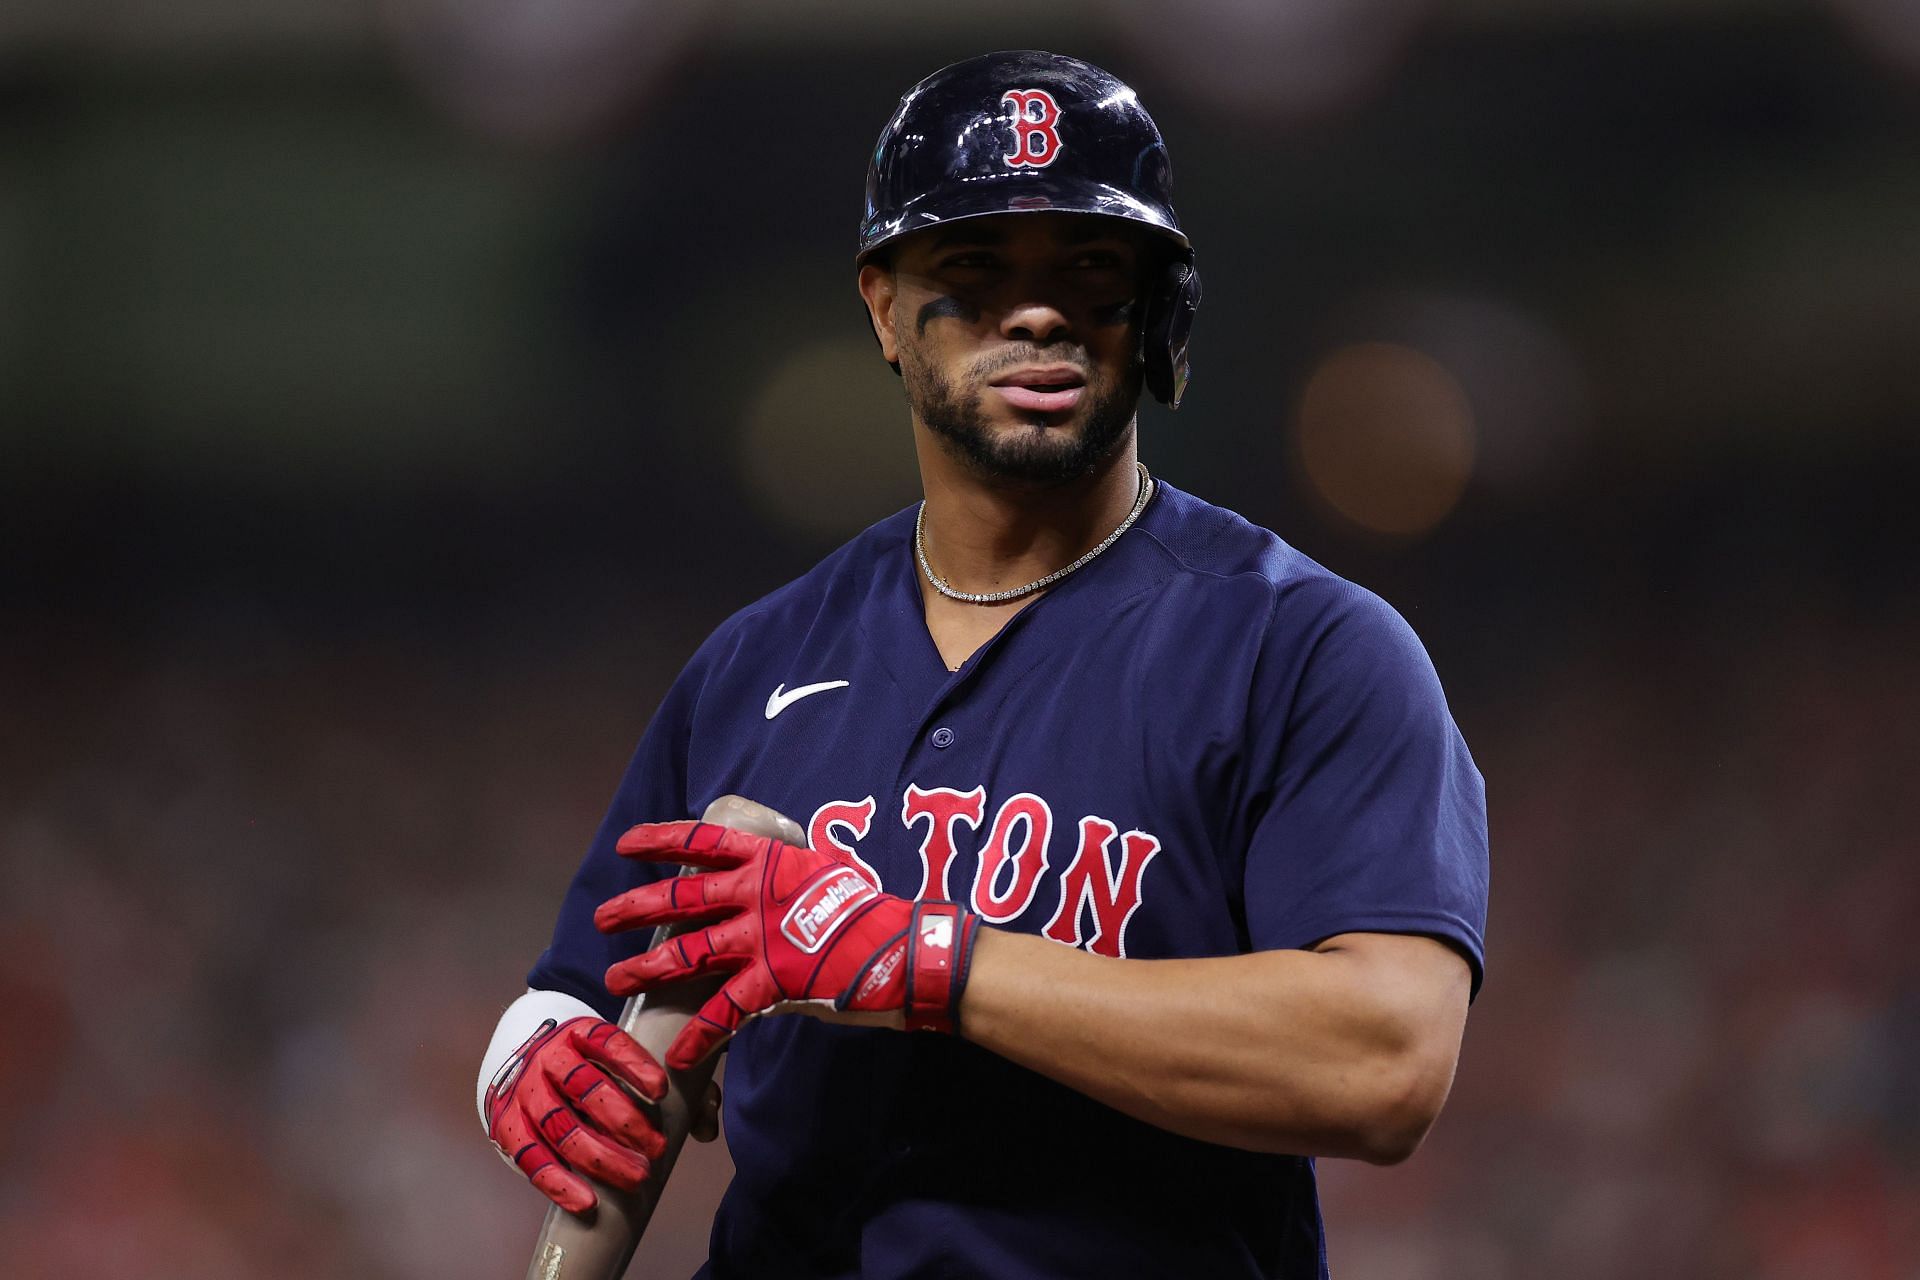 Xander Bogaerts to pay tribute to former Boston Red Sox All-Star